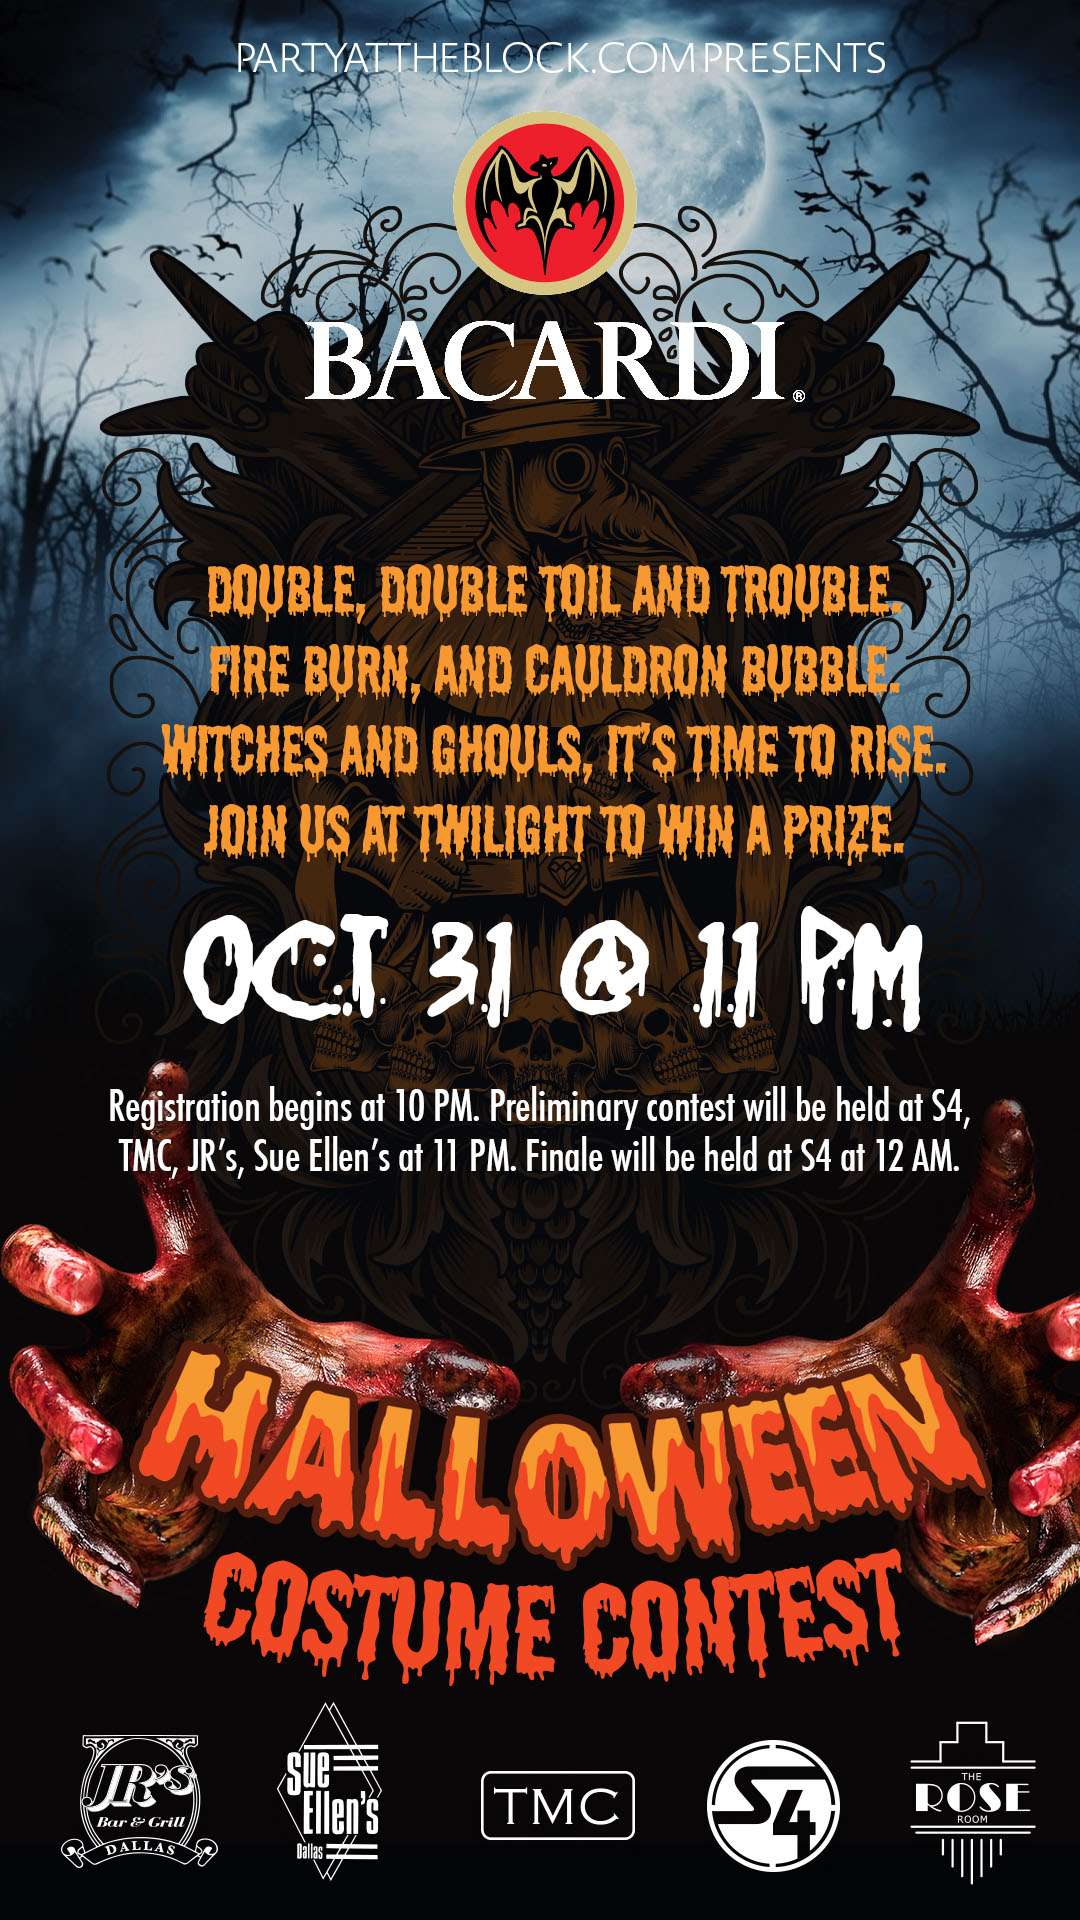 Halloween Costume Contest Party At The Block Lgbtq Nightlife